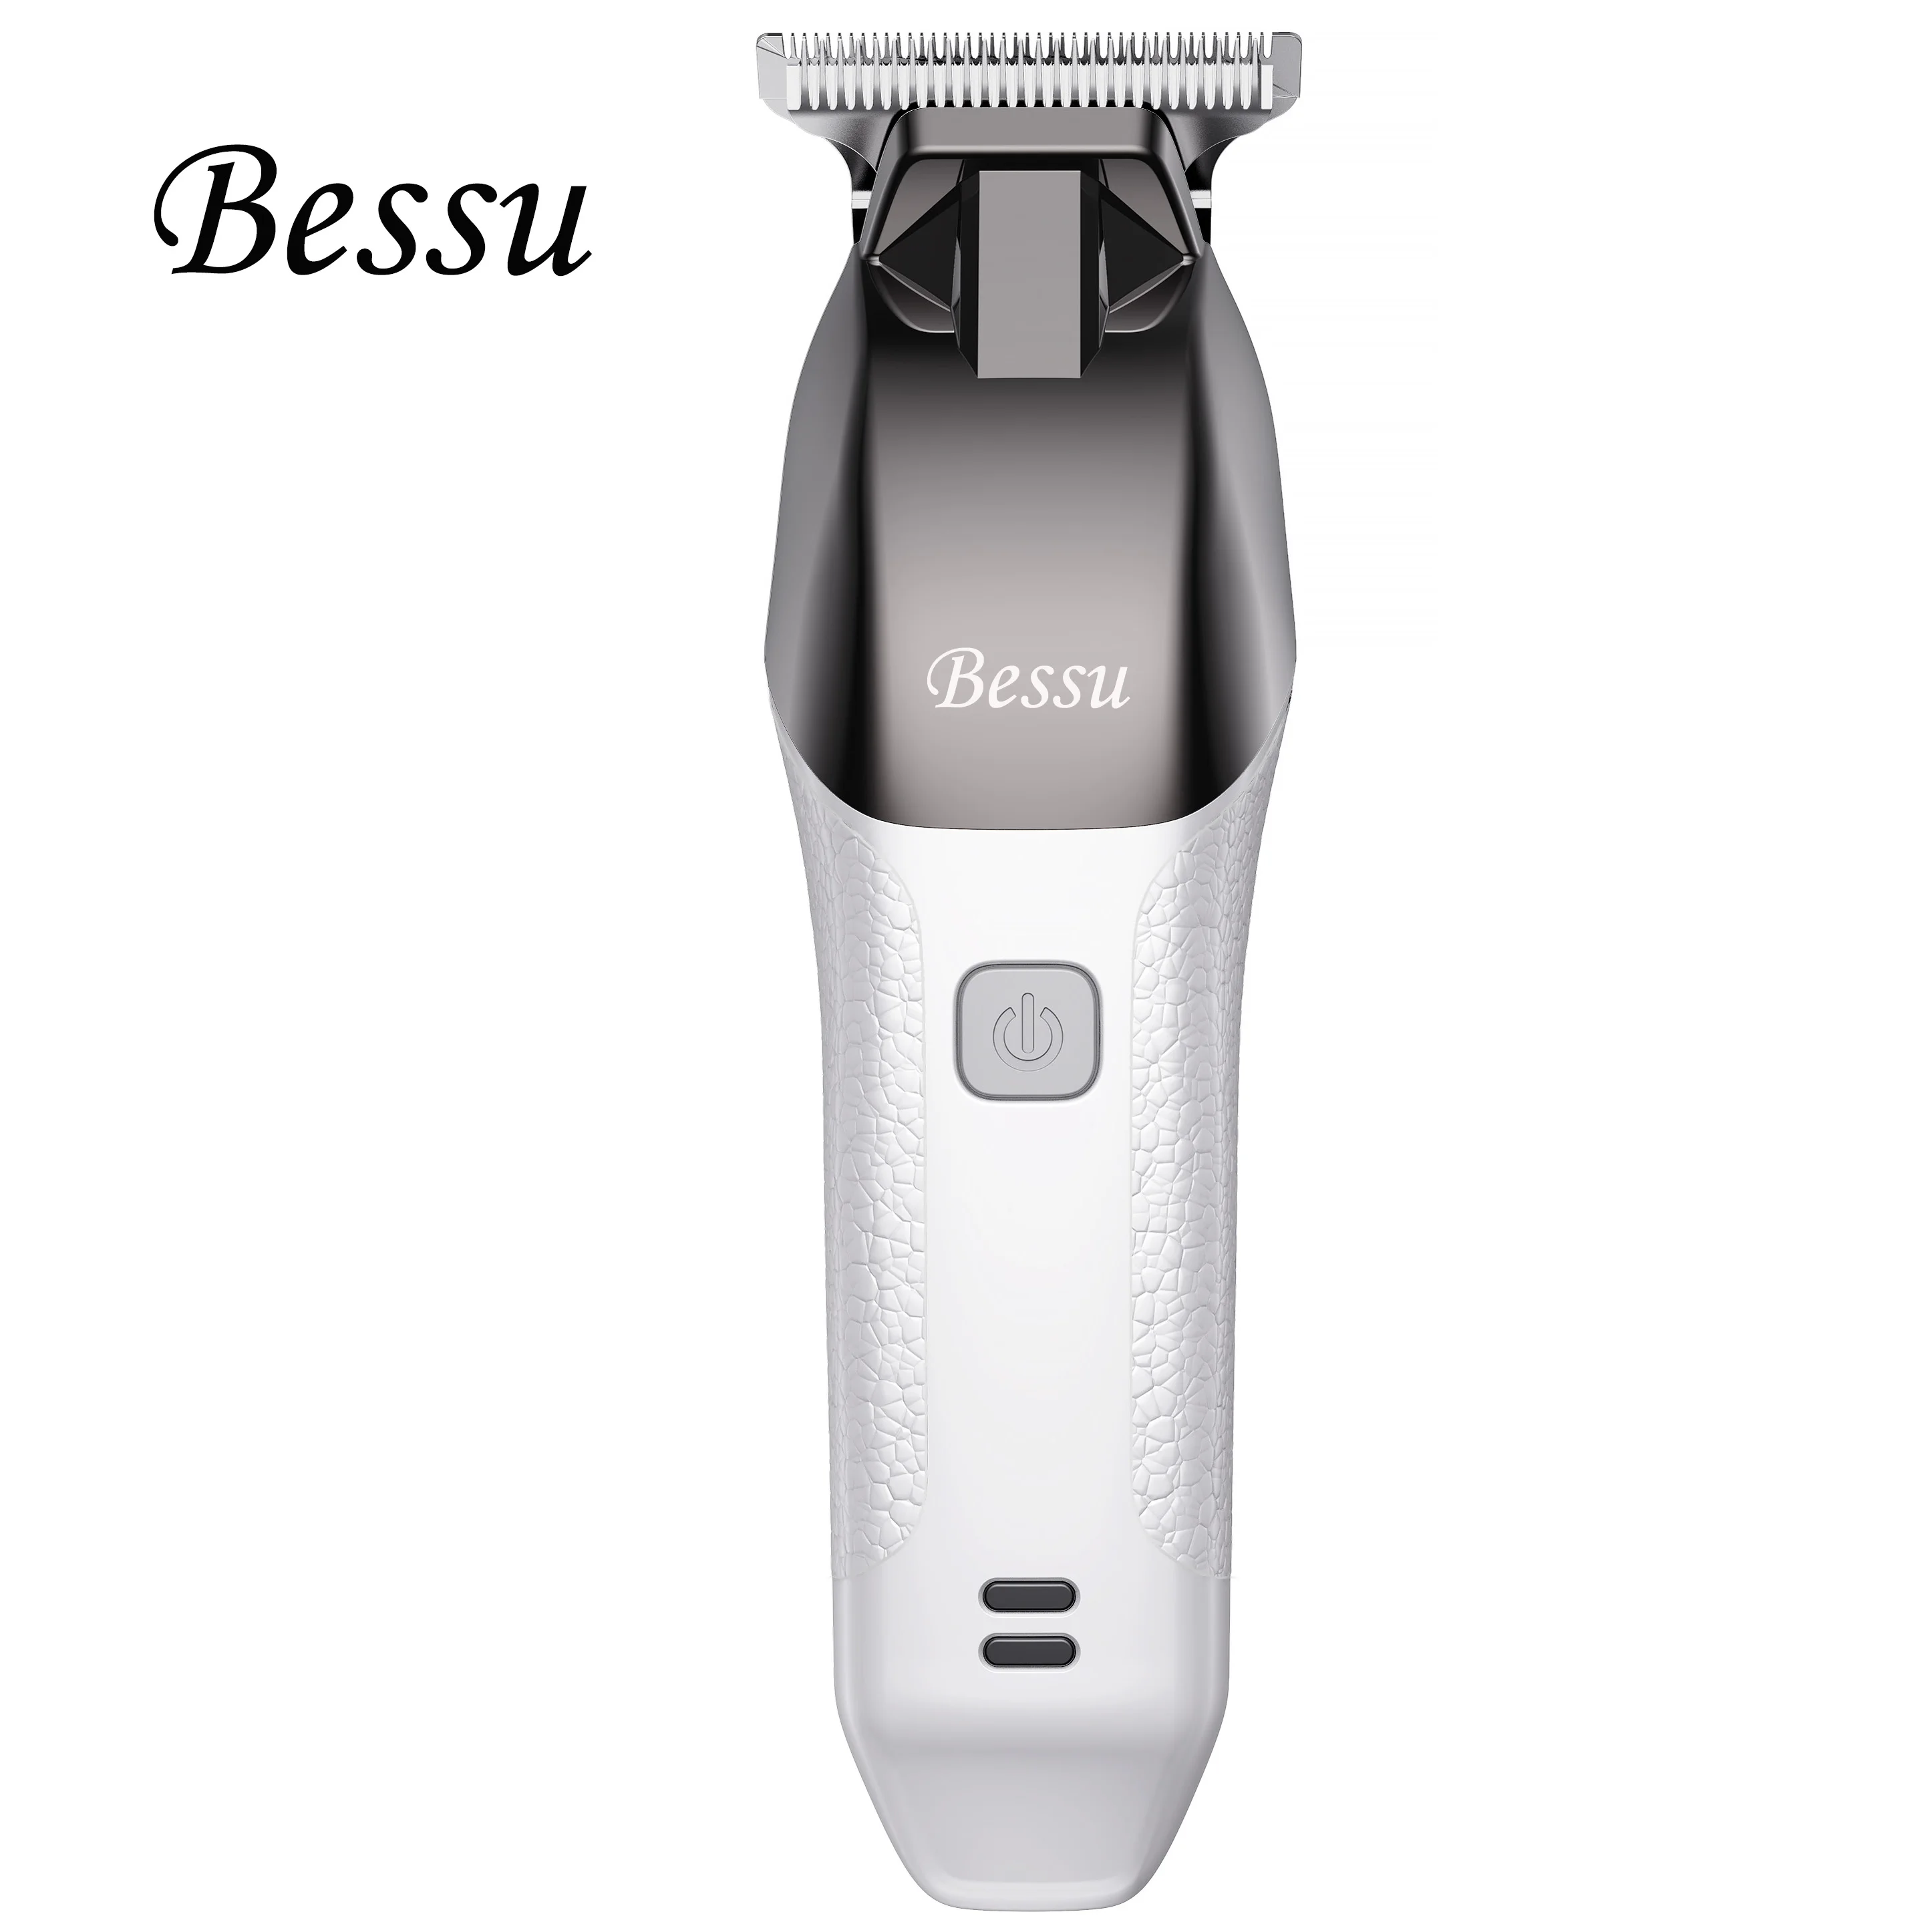 Ufree Professional T Blade Hair Trimmers Zero Gapped Hair Clippers for Men  CordCordless Rechargeable Hair Liners Clipper Metal Hair Cutting for  HeadBeard  Black price in Saudi Arabia  Amazon Saudi Arabia 